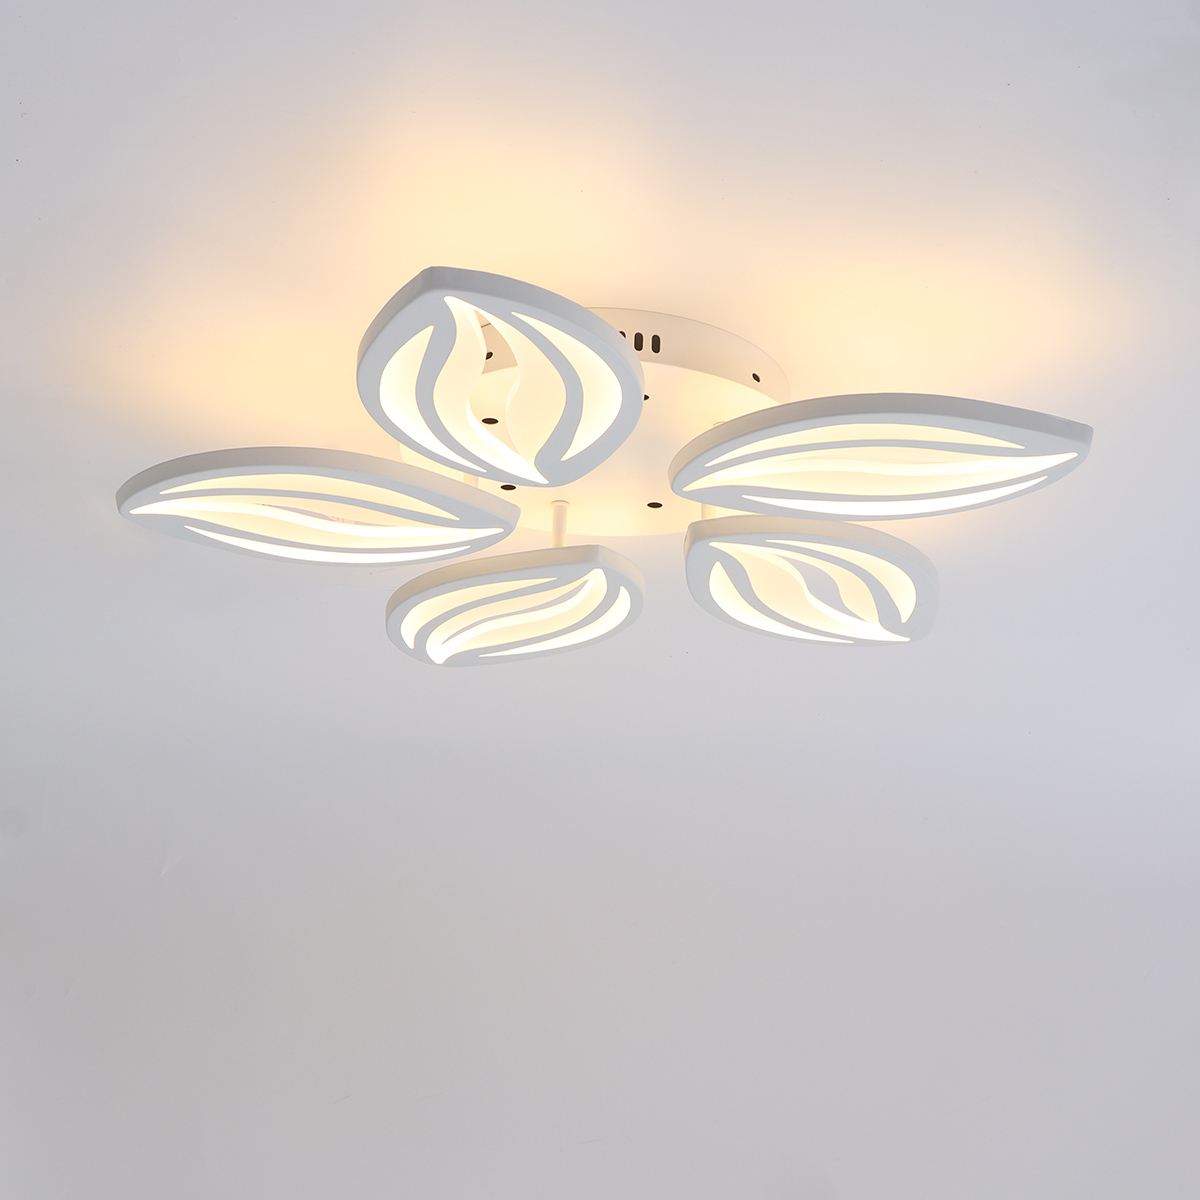 AC110-220V-6000LM-550LED-Ceiling-Light-Fixture-Lamp-Remote-Control-Bedroom-Study-Parlor-1807229-11